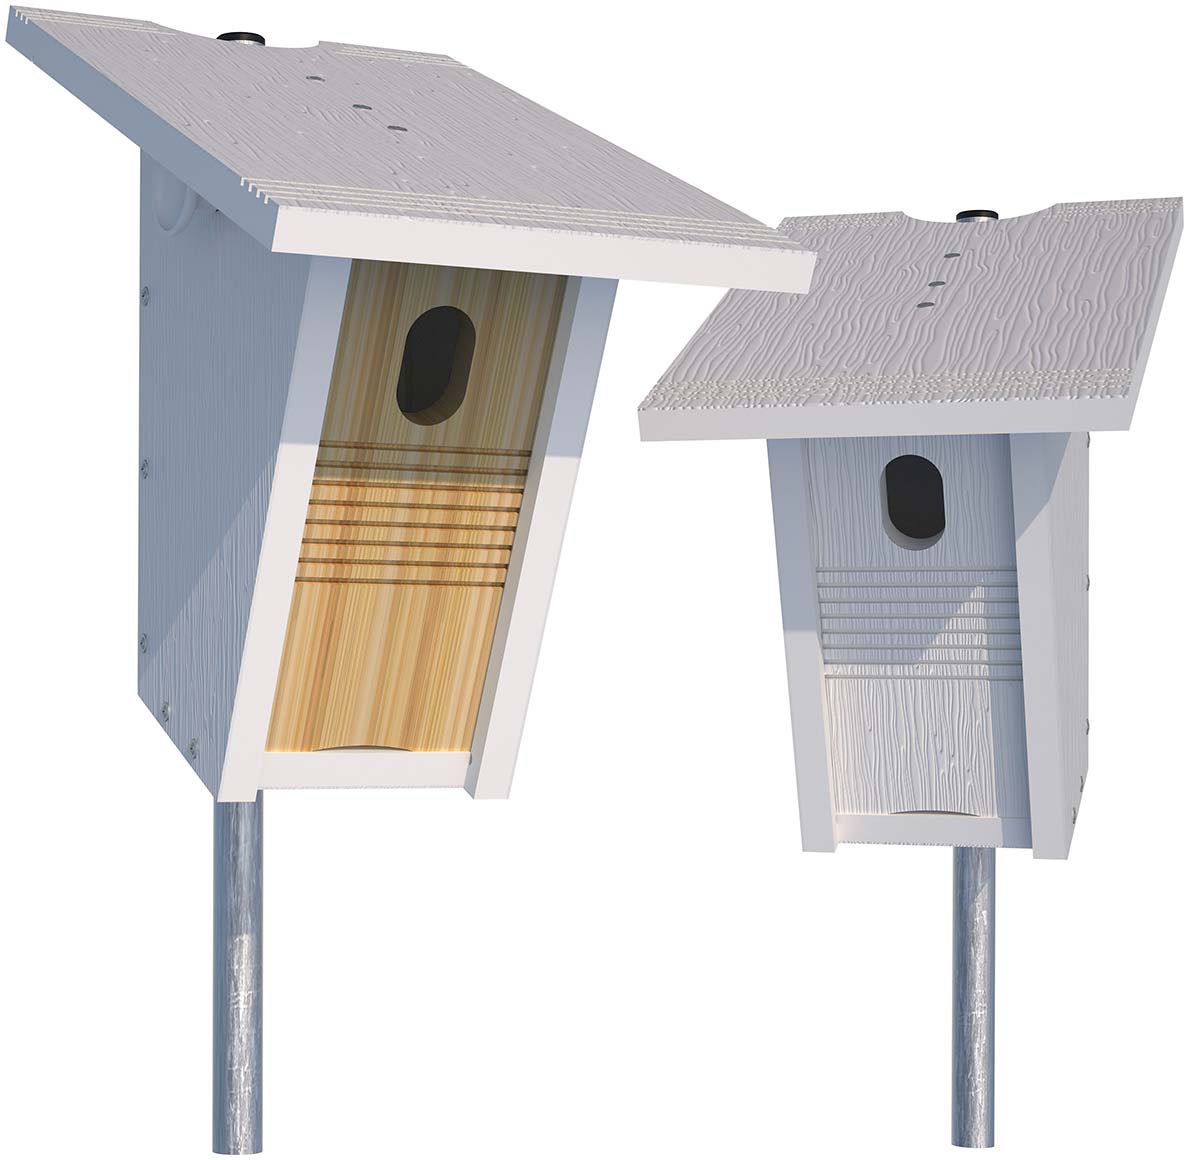 Image of two Star Prairie Nest Boxes, one with a cedar wood entrance panel and one with a cellular PVC entrance panel.